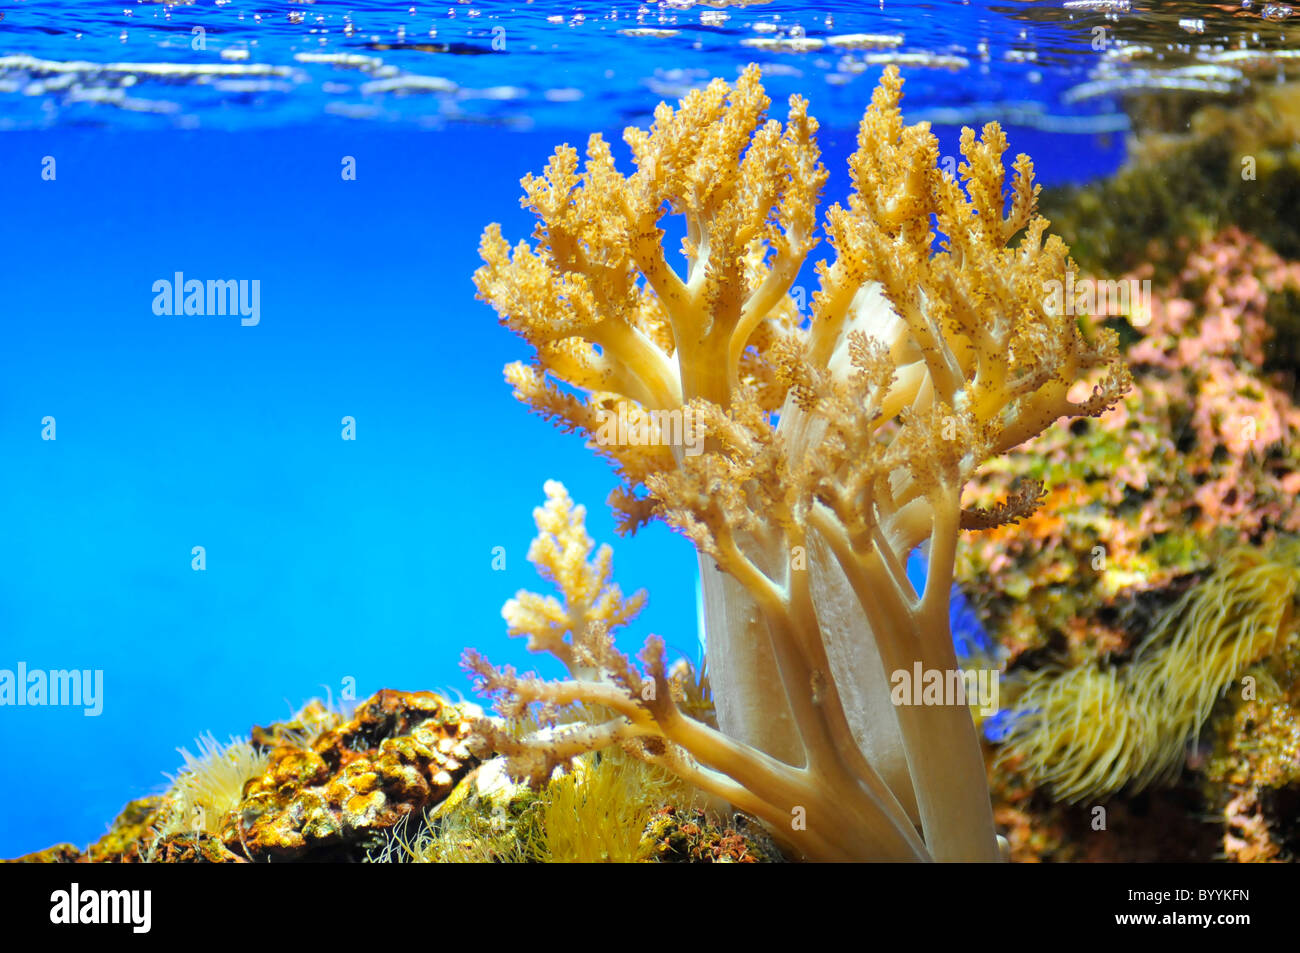 Yellow coral in a aquarium of seawater Stock Photo